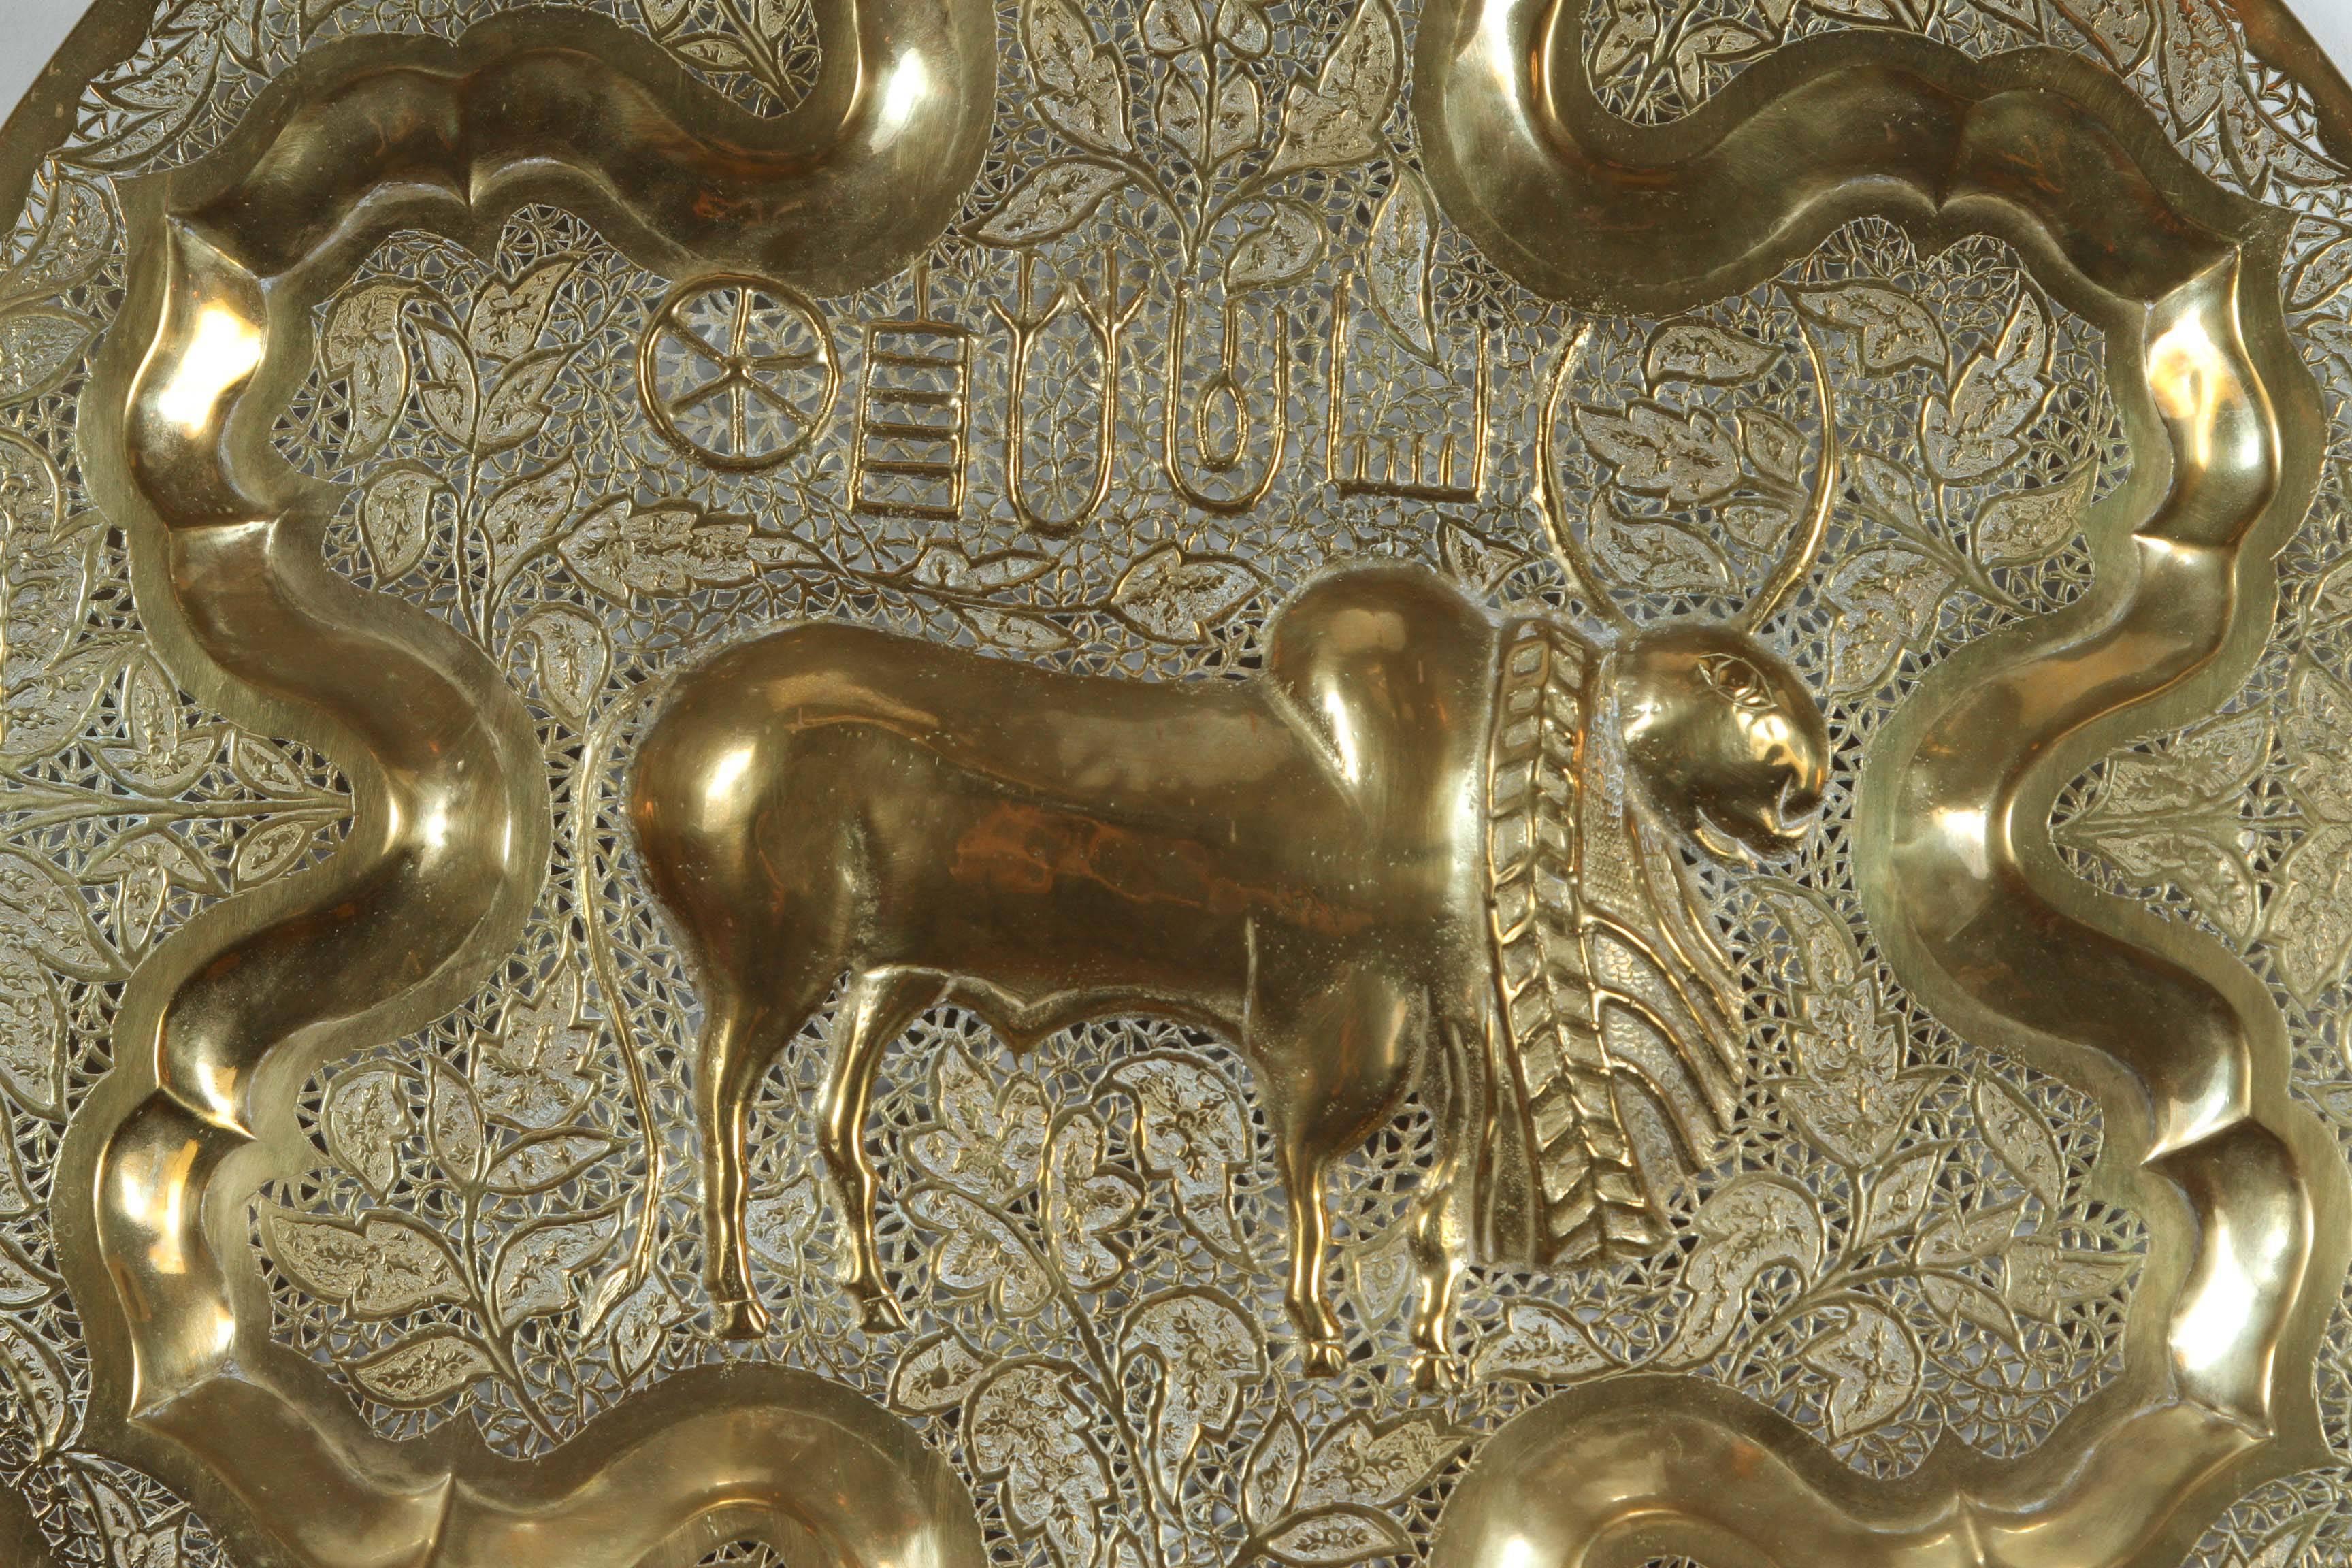 hammered metalwork of west asia